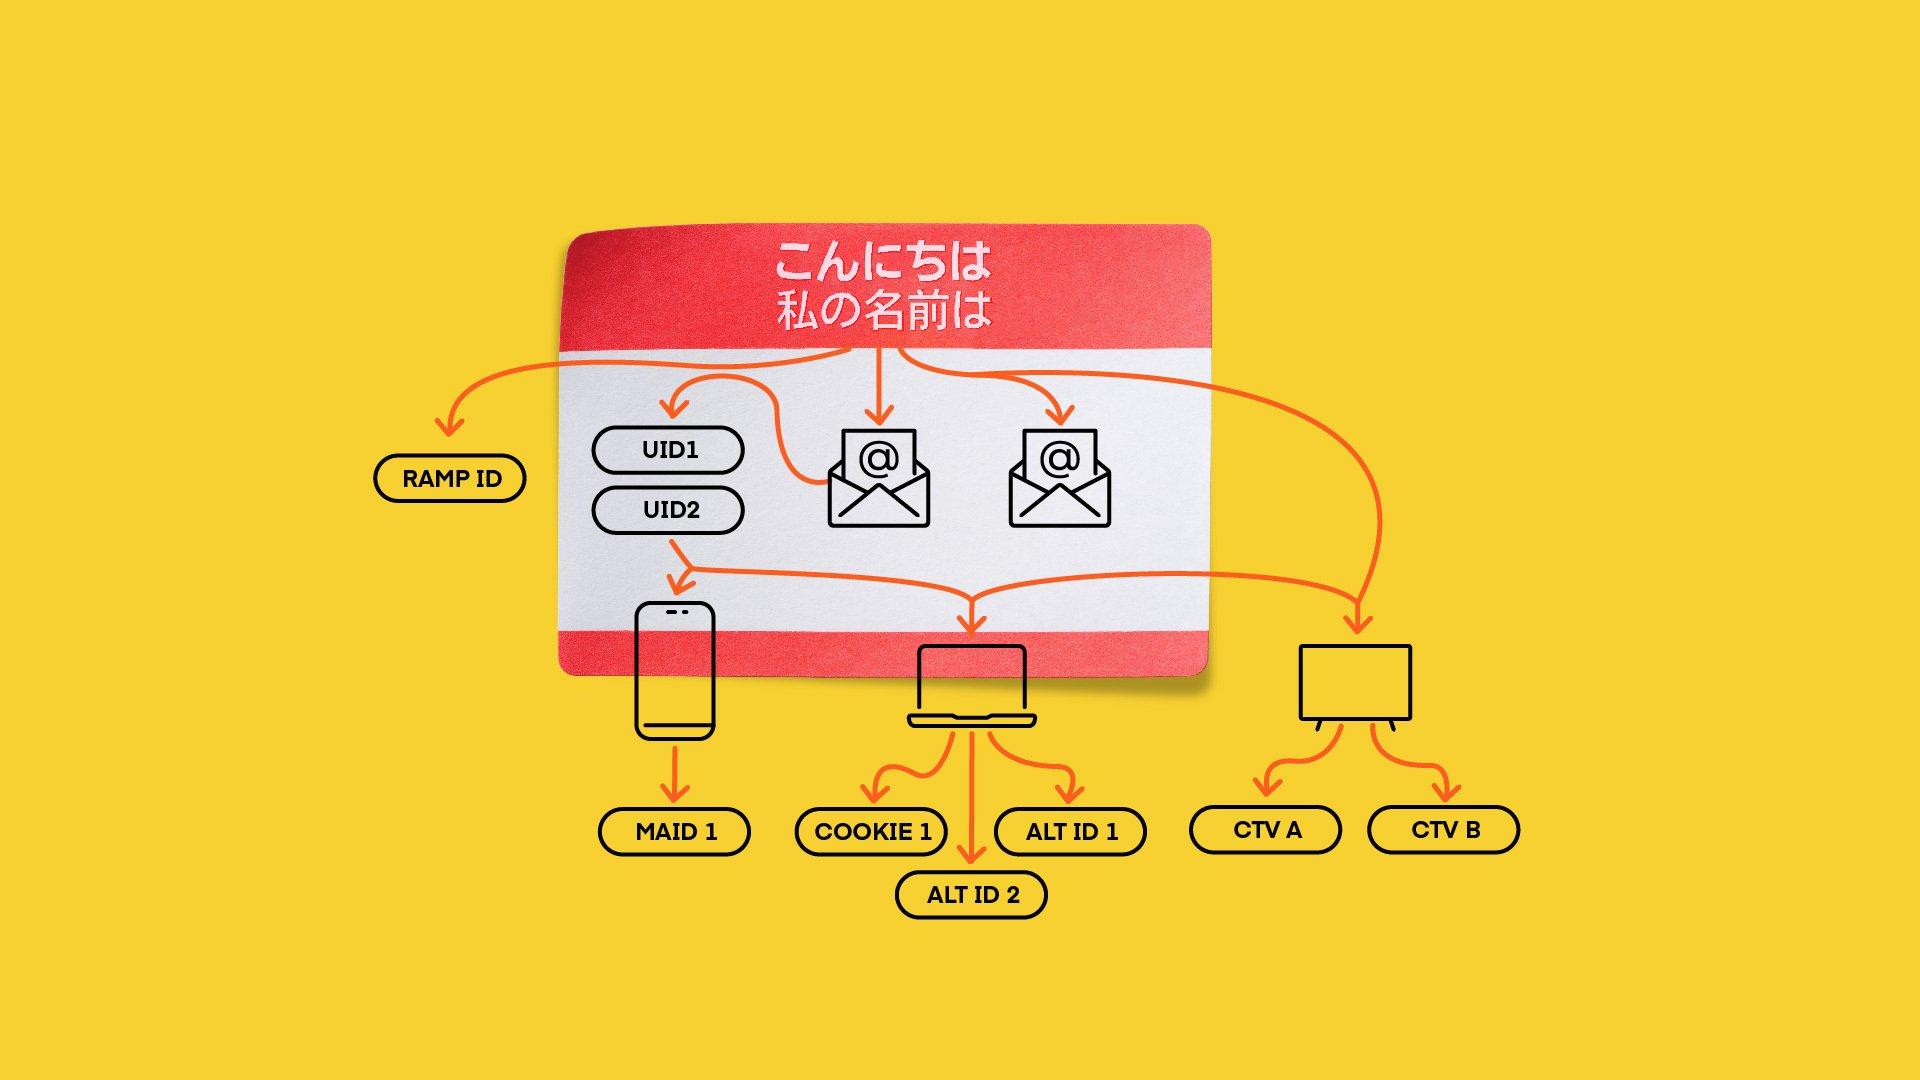 Yellow background with a "hello my name is" tag and an illustration of how Identity Graphs work